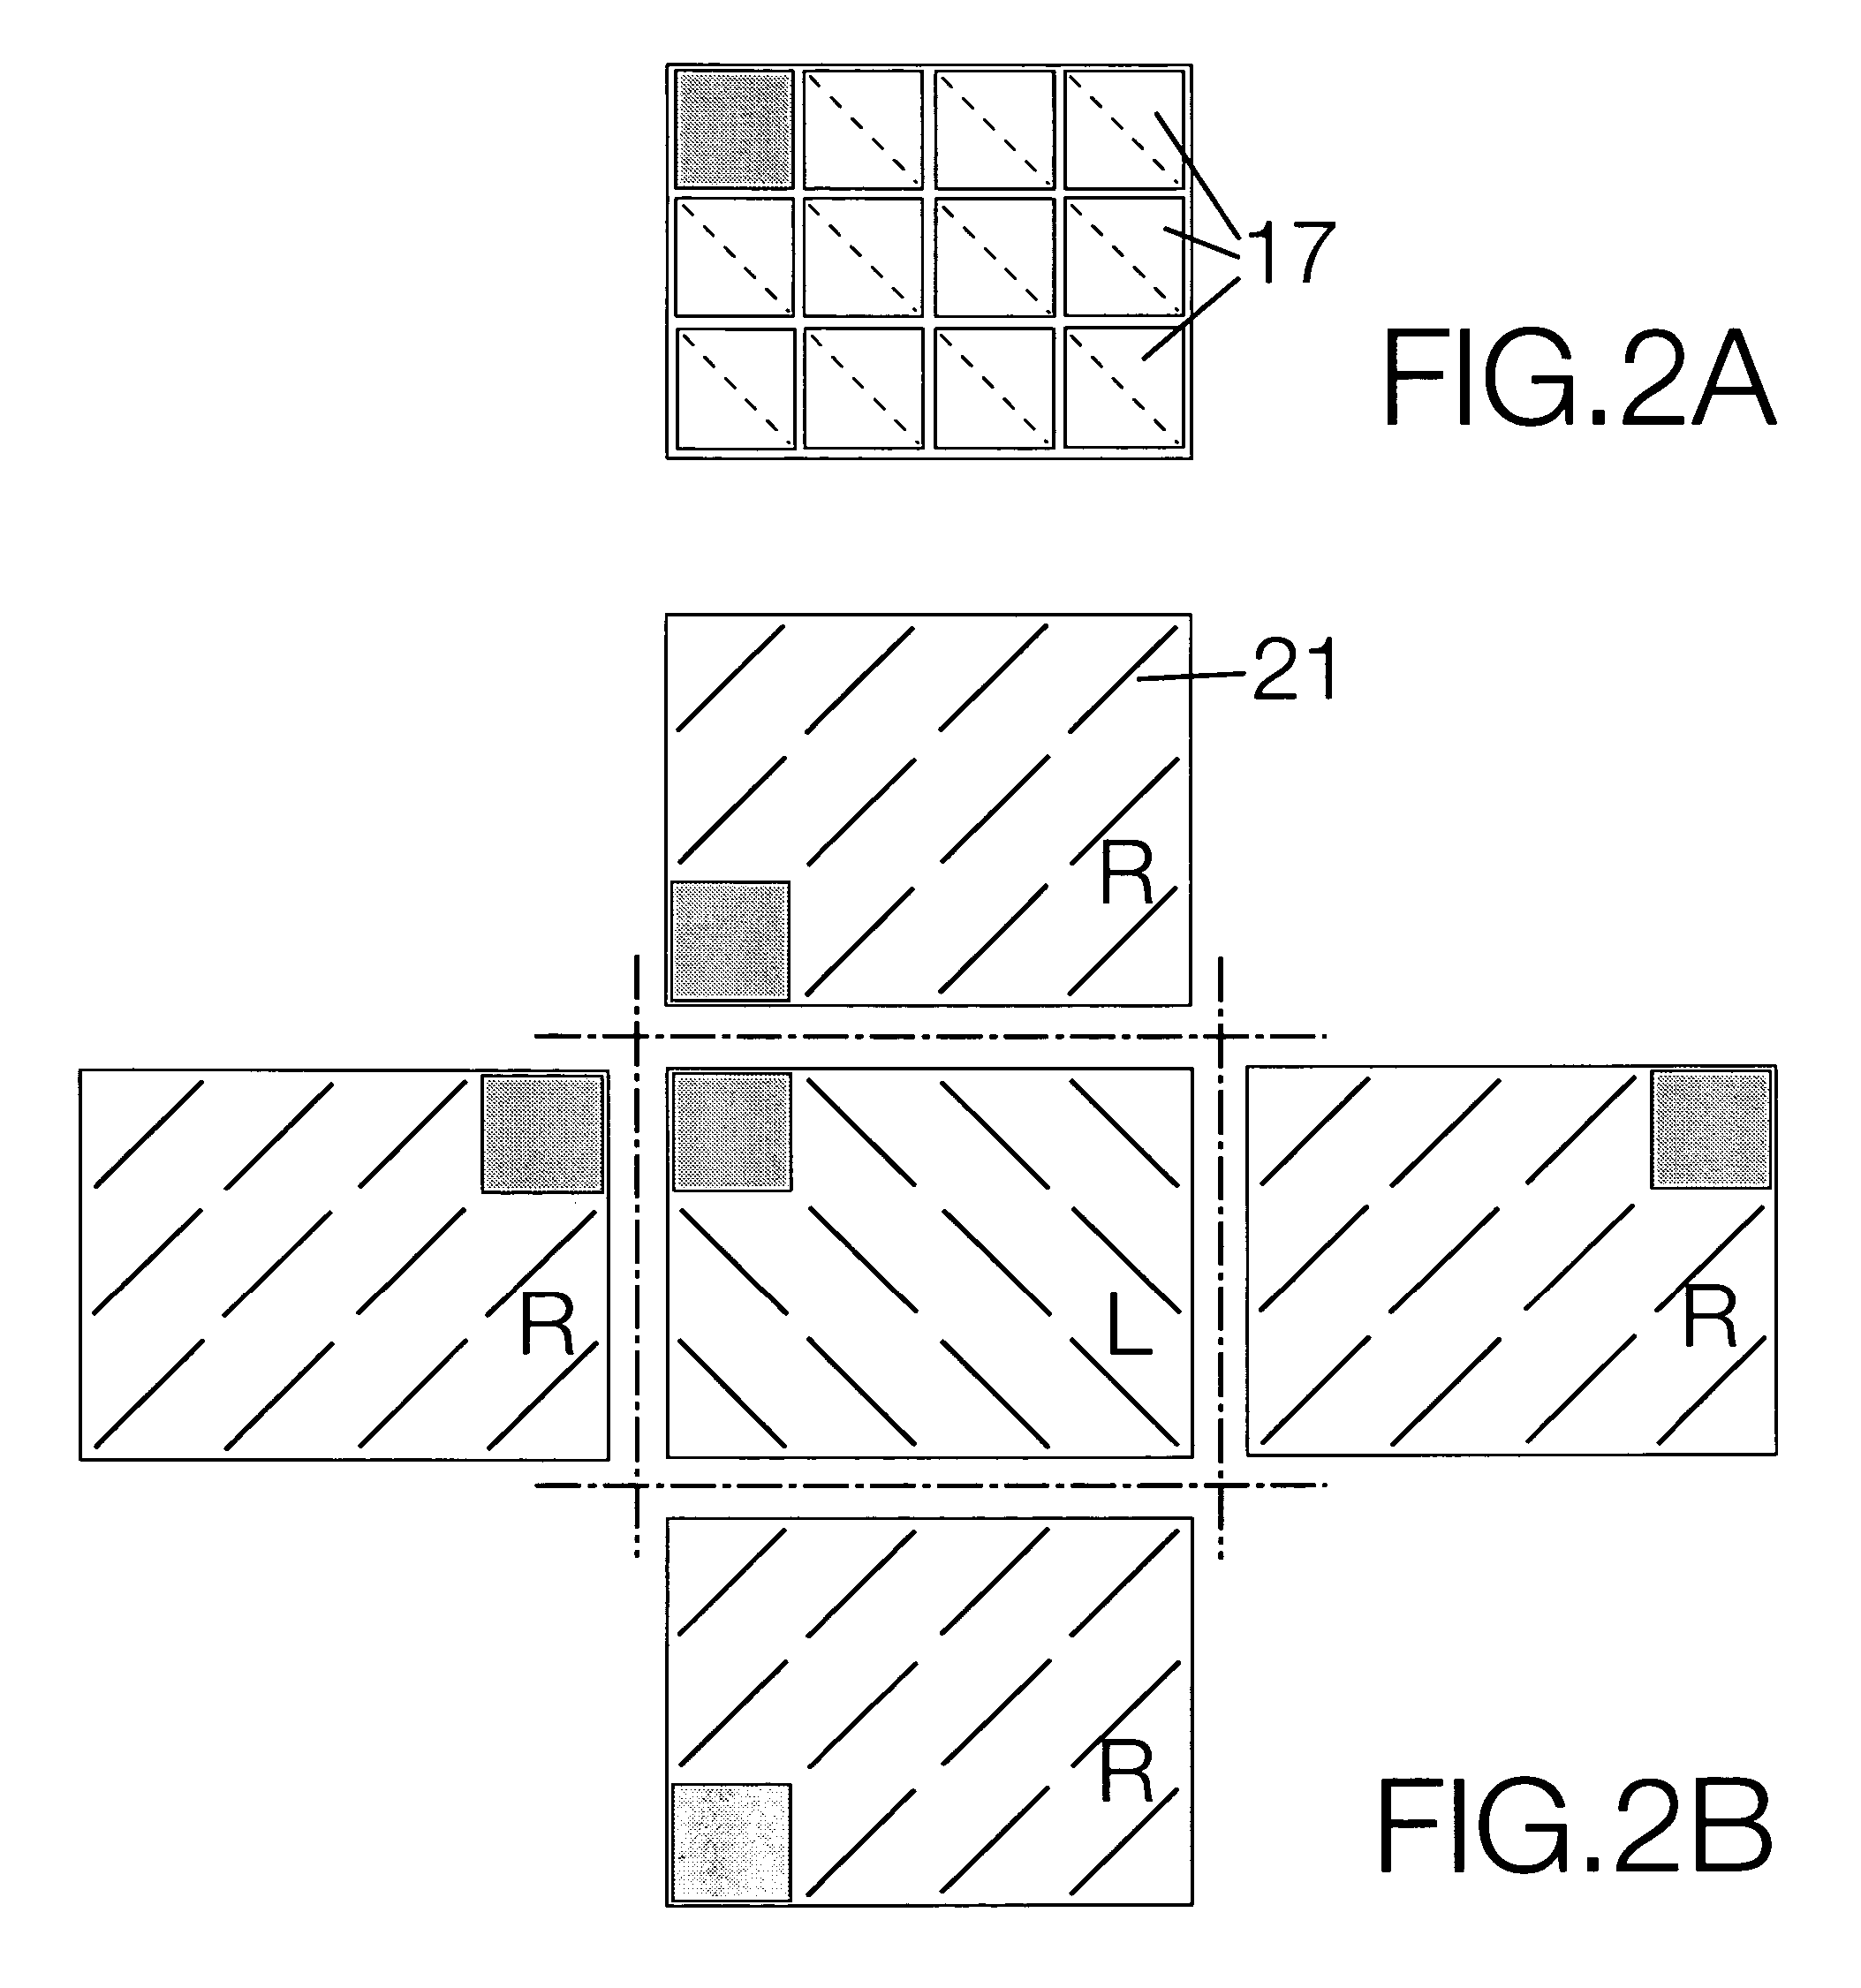 2-Channel display system comprising micro electro mechanical systems